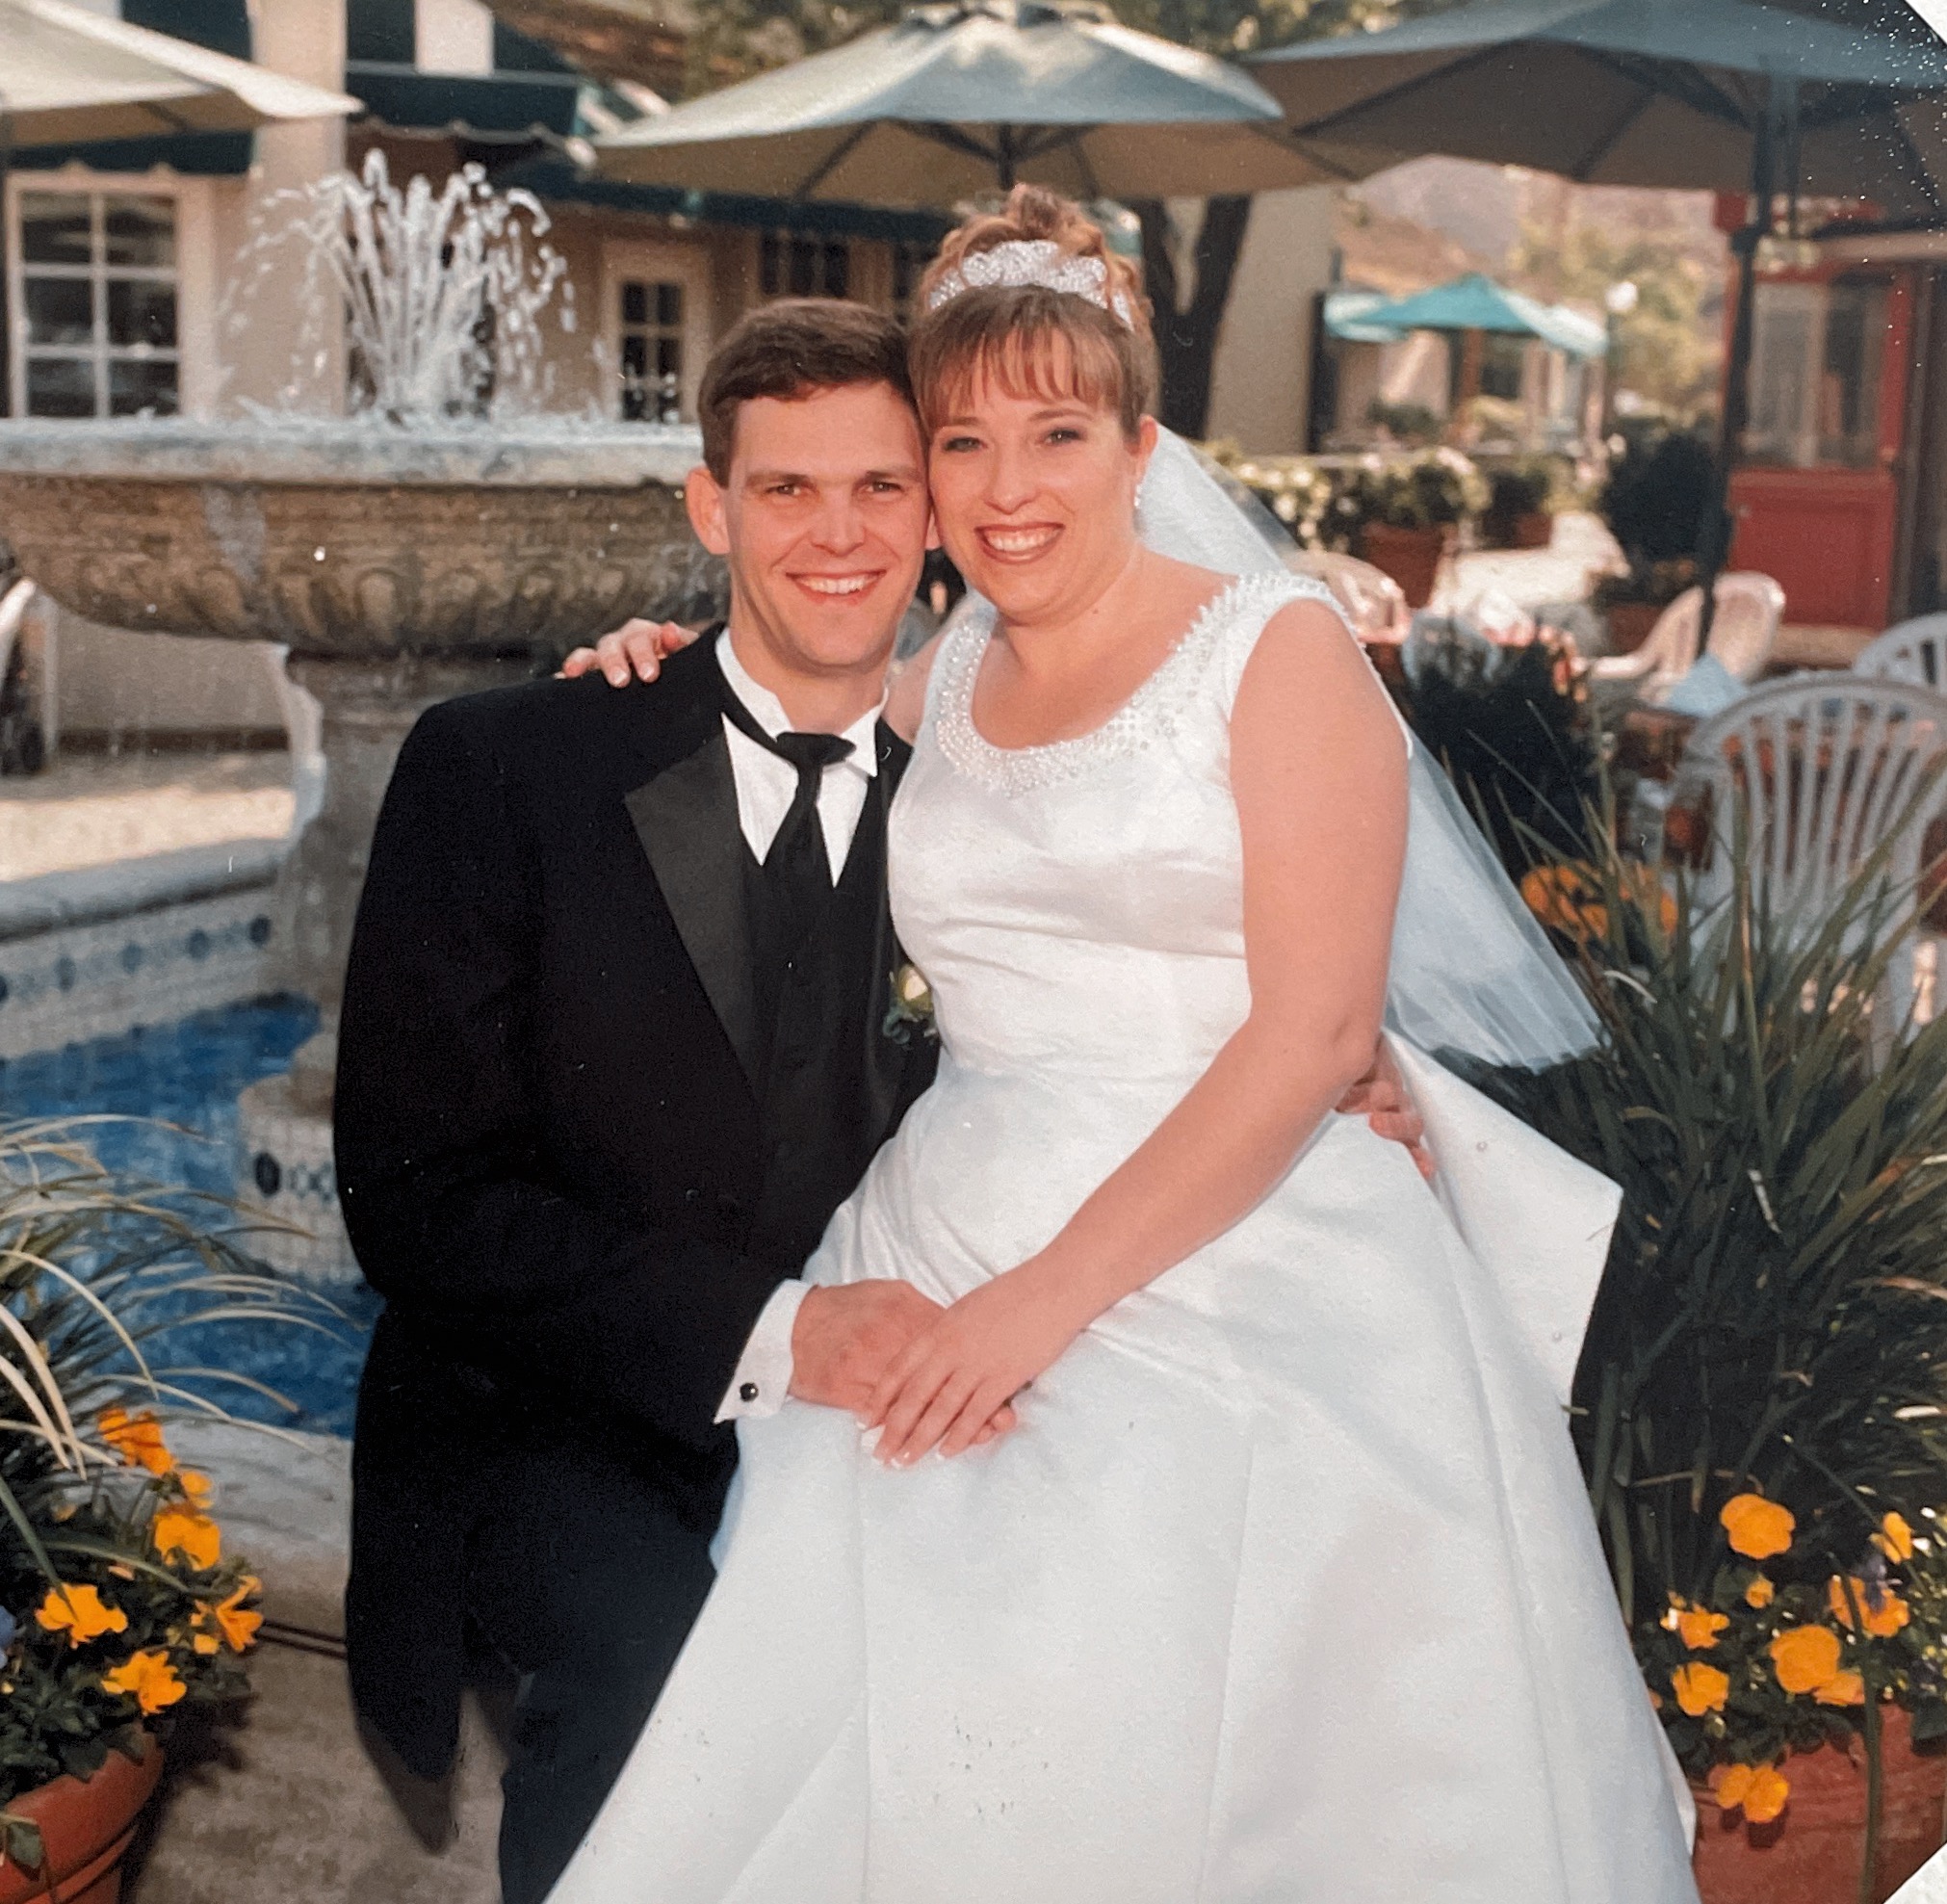 Our Wedding Day 3/17/2001